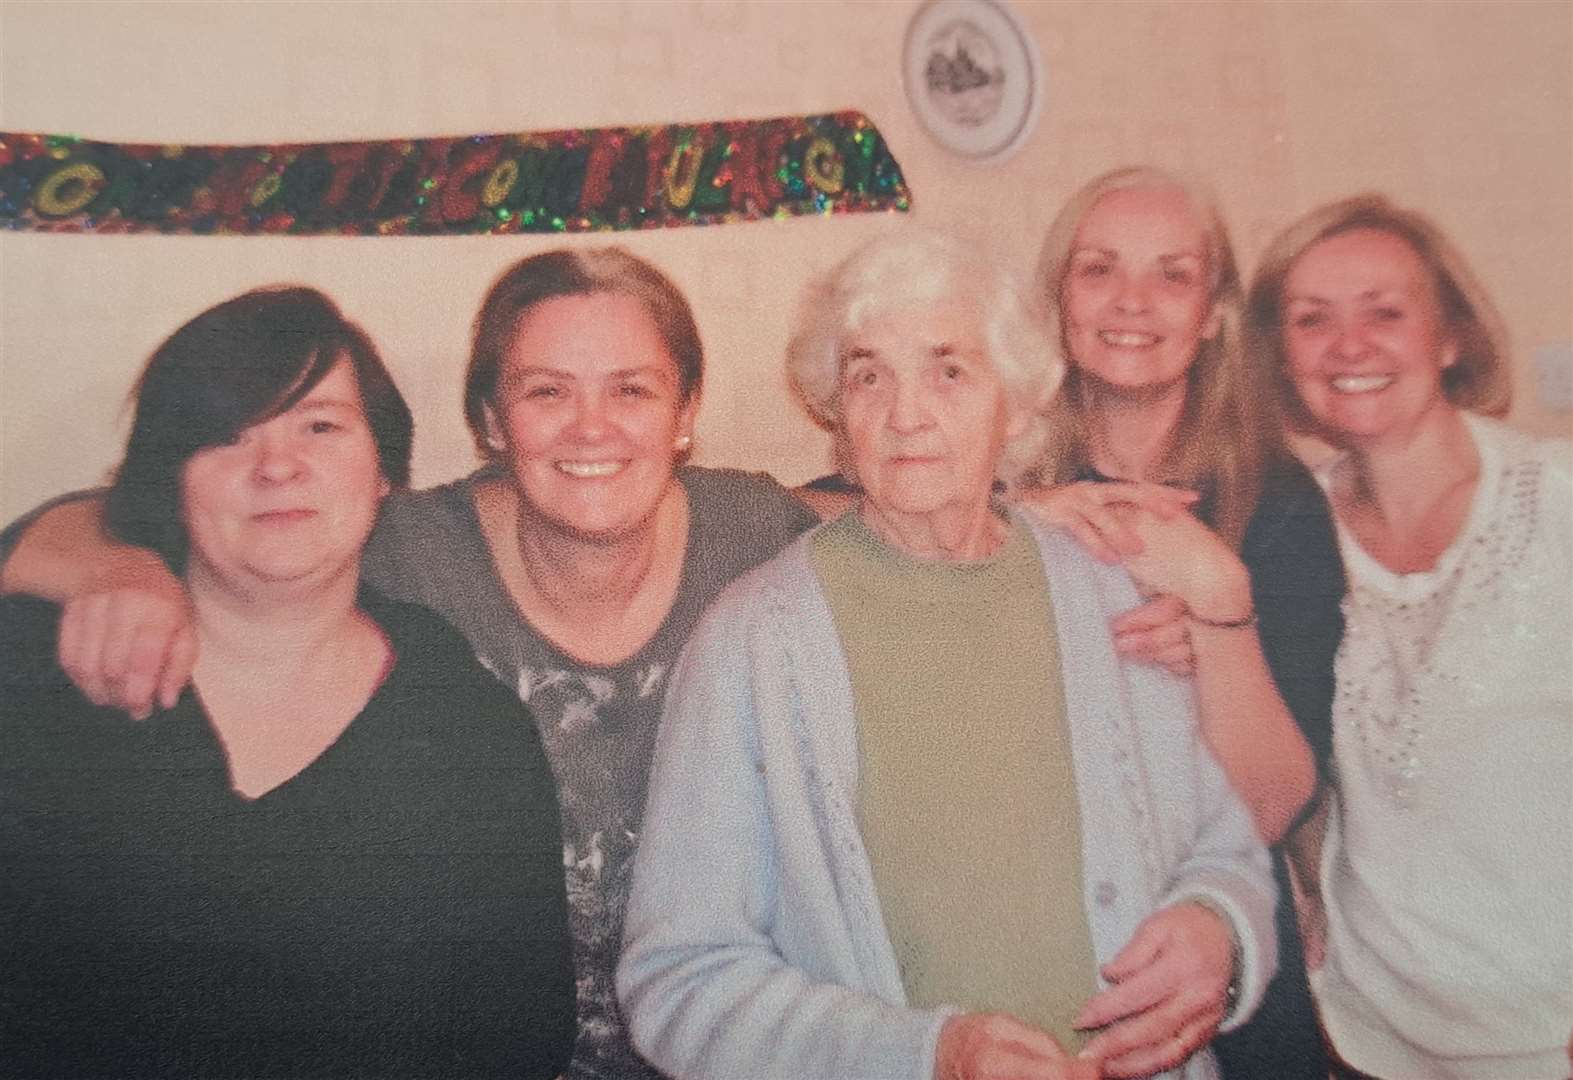 The four Sedgwick sisters with their mother Maud, celebrating her 80th birthday in 2014. Picture courtesy of the Sedgwick family